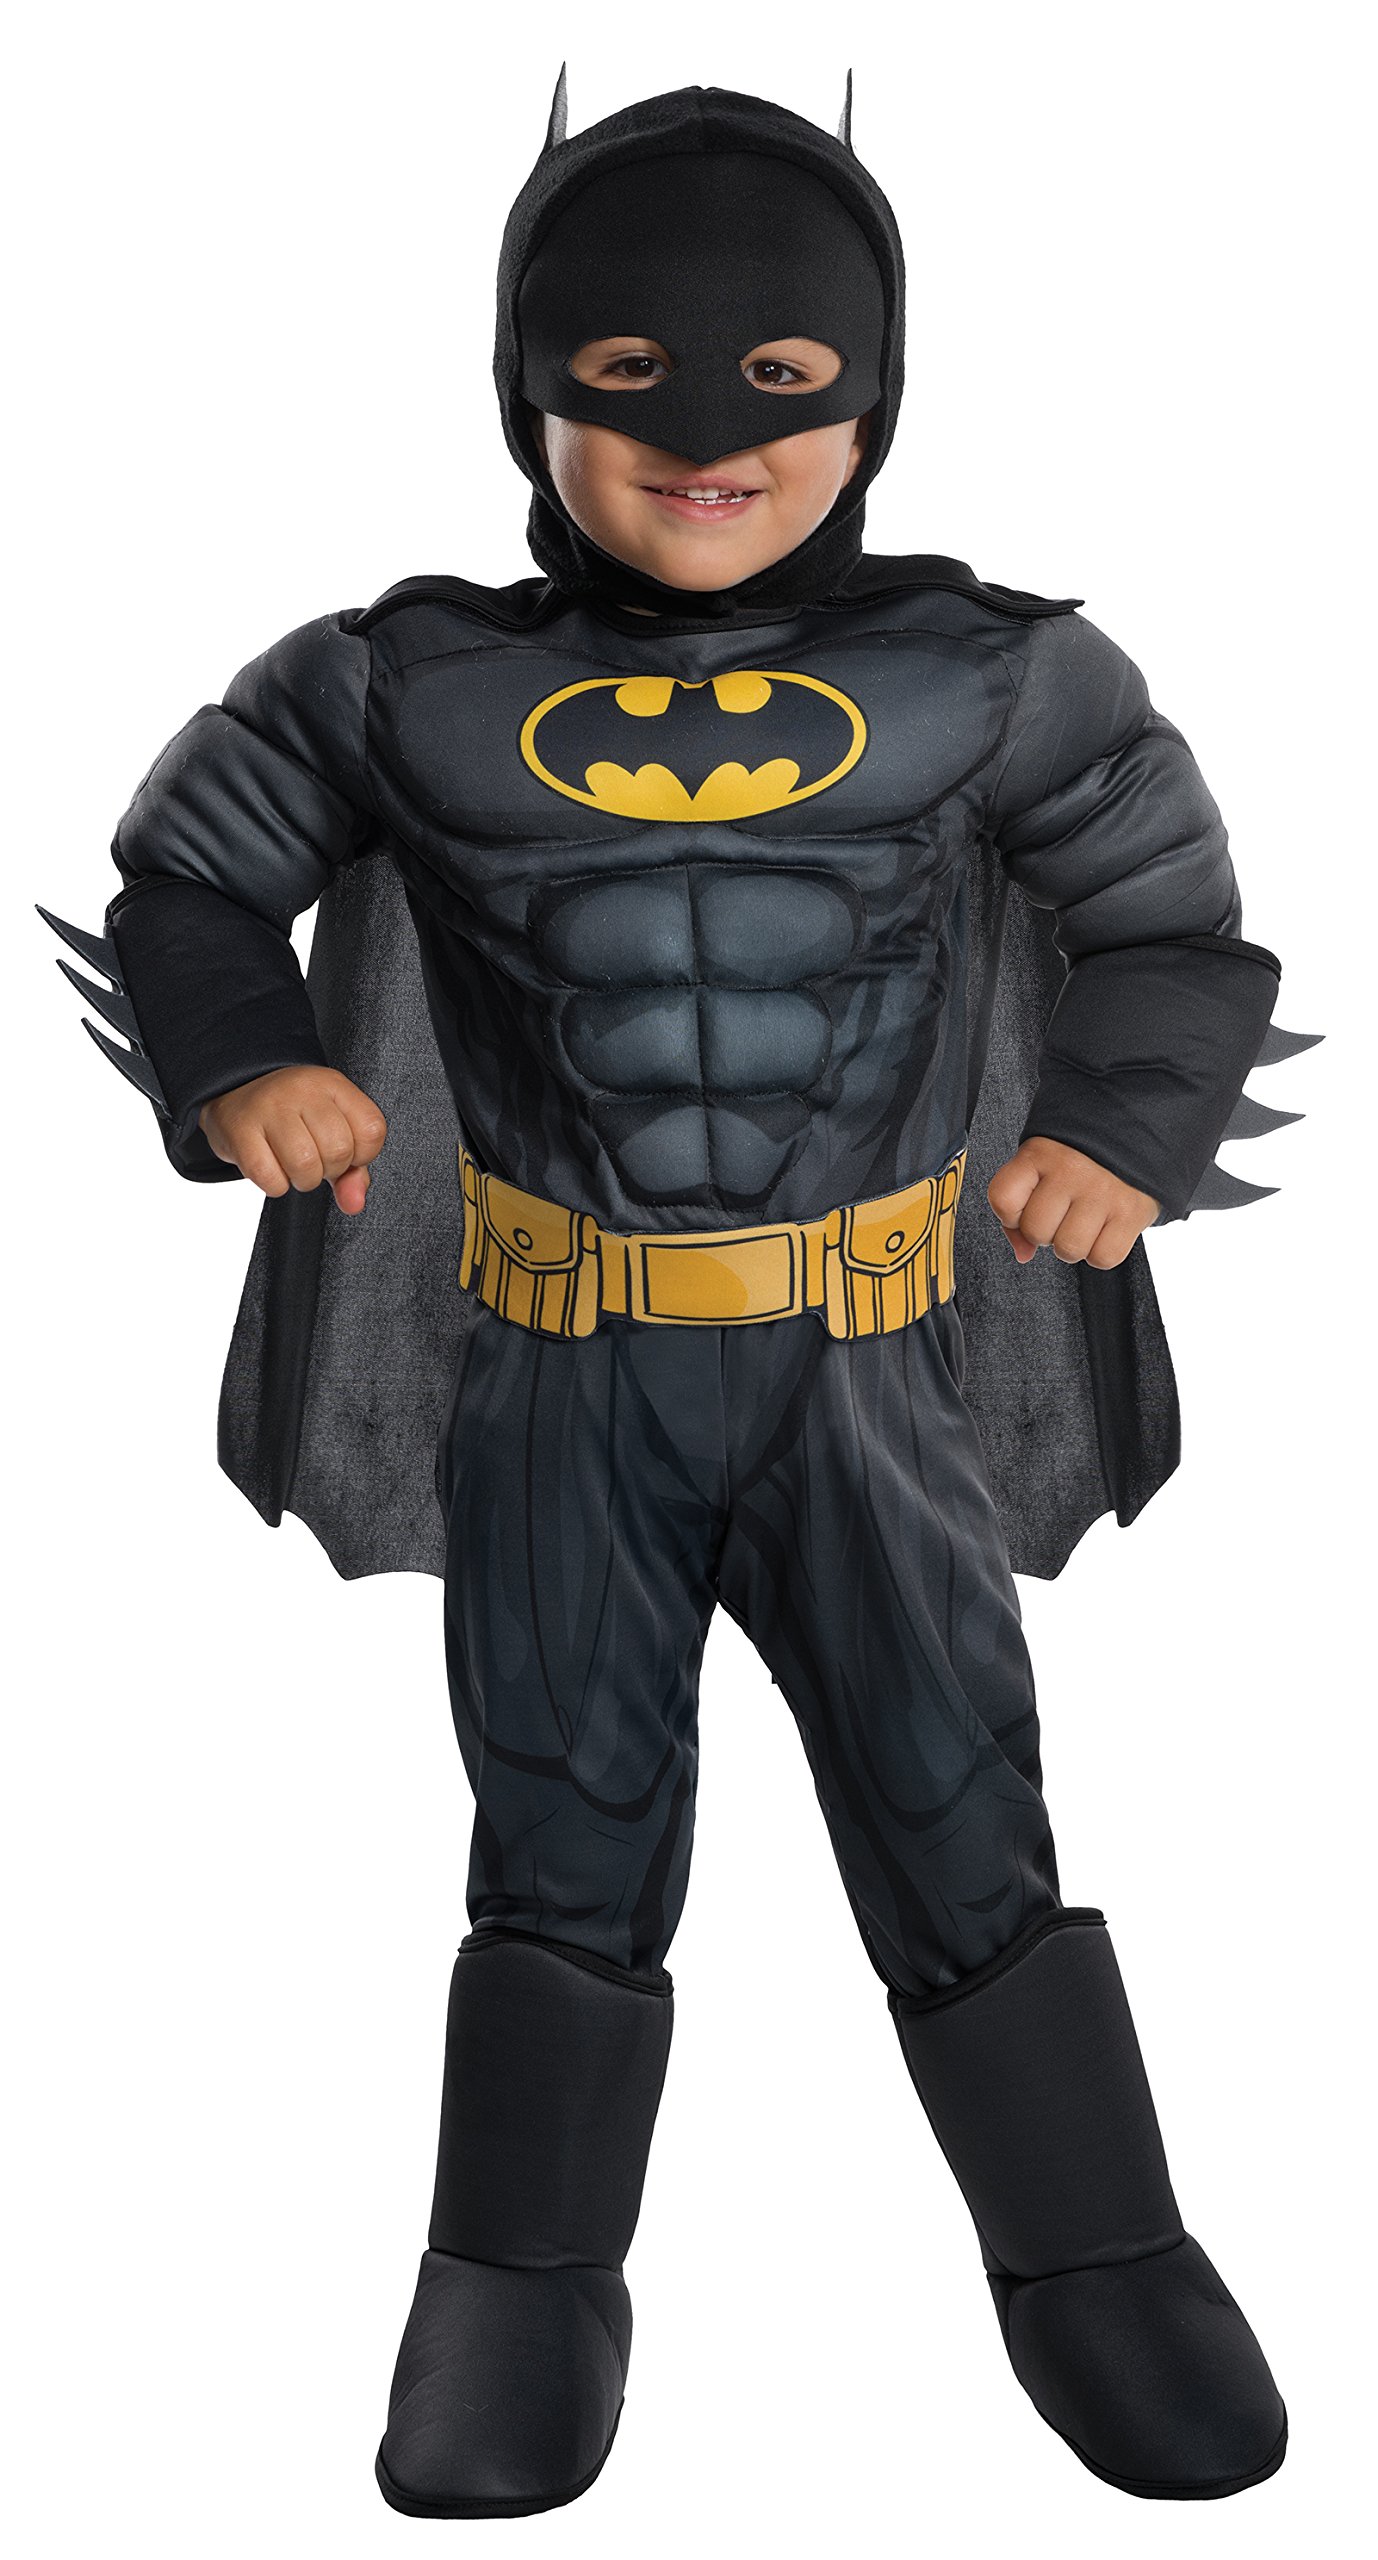 Rubie's Batman Deluxe Costume for Toddlers